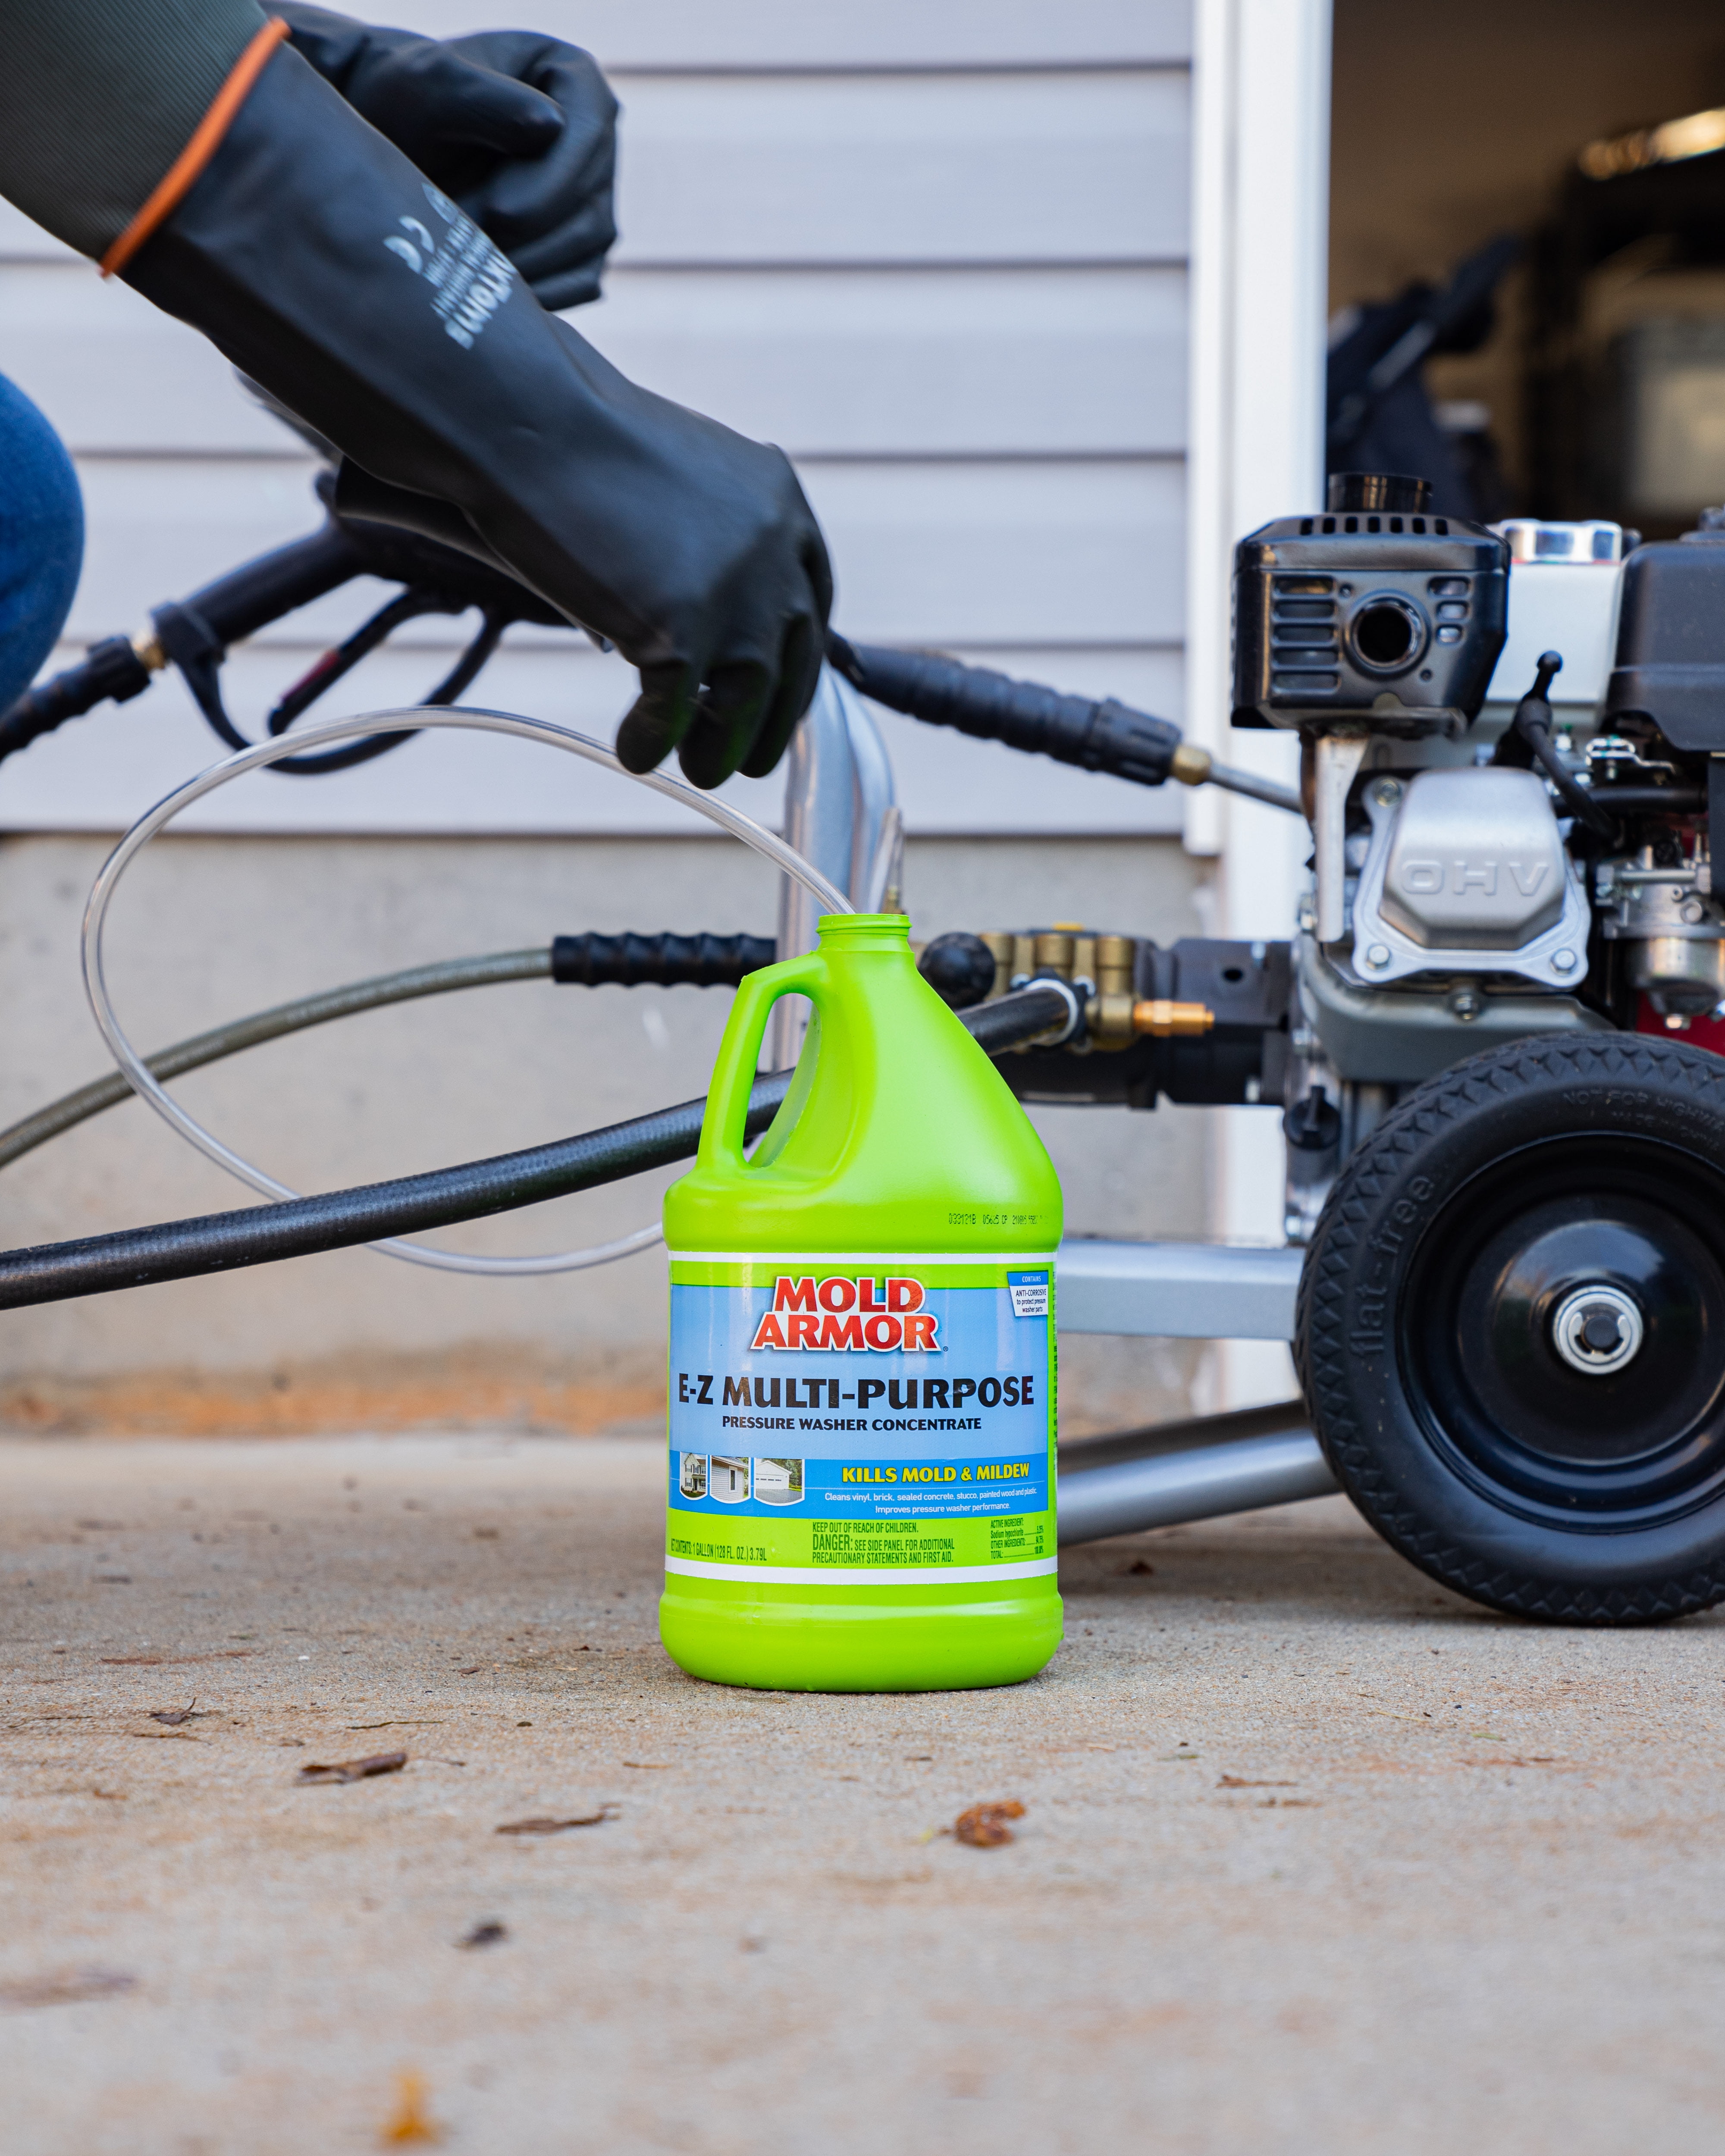 Mold Armor 128 oz. Concrete Pressure Washer Cleaner in the Pressure Washer  Cleaning Solutions department at